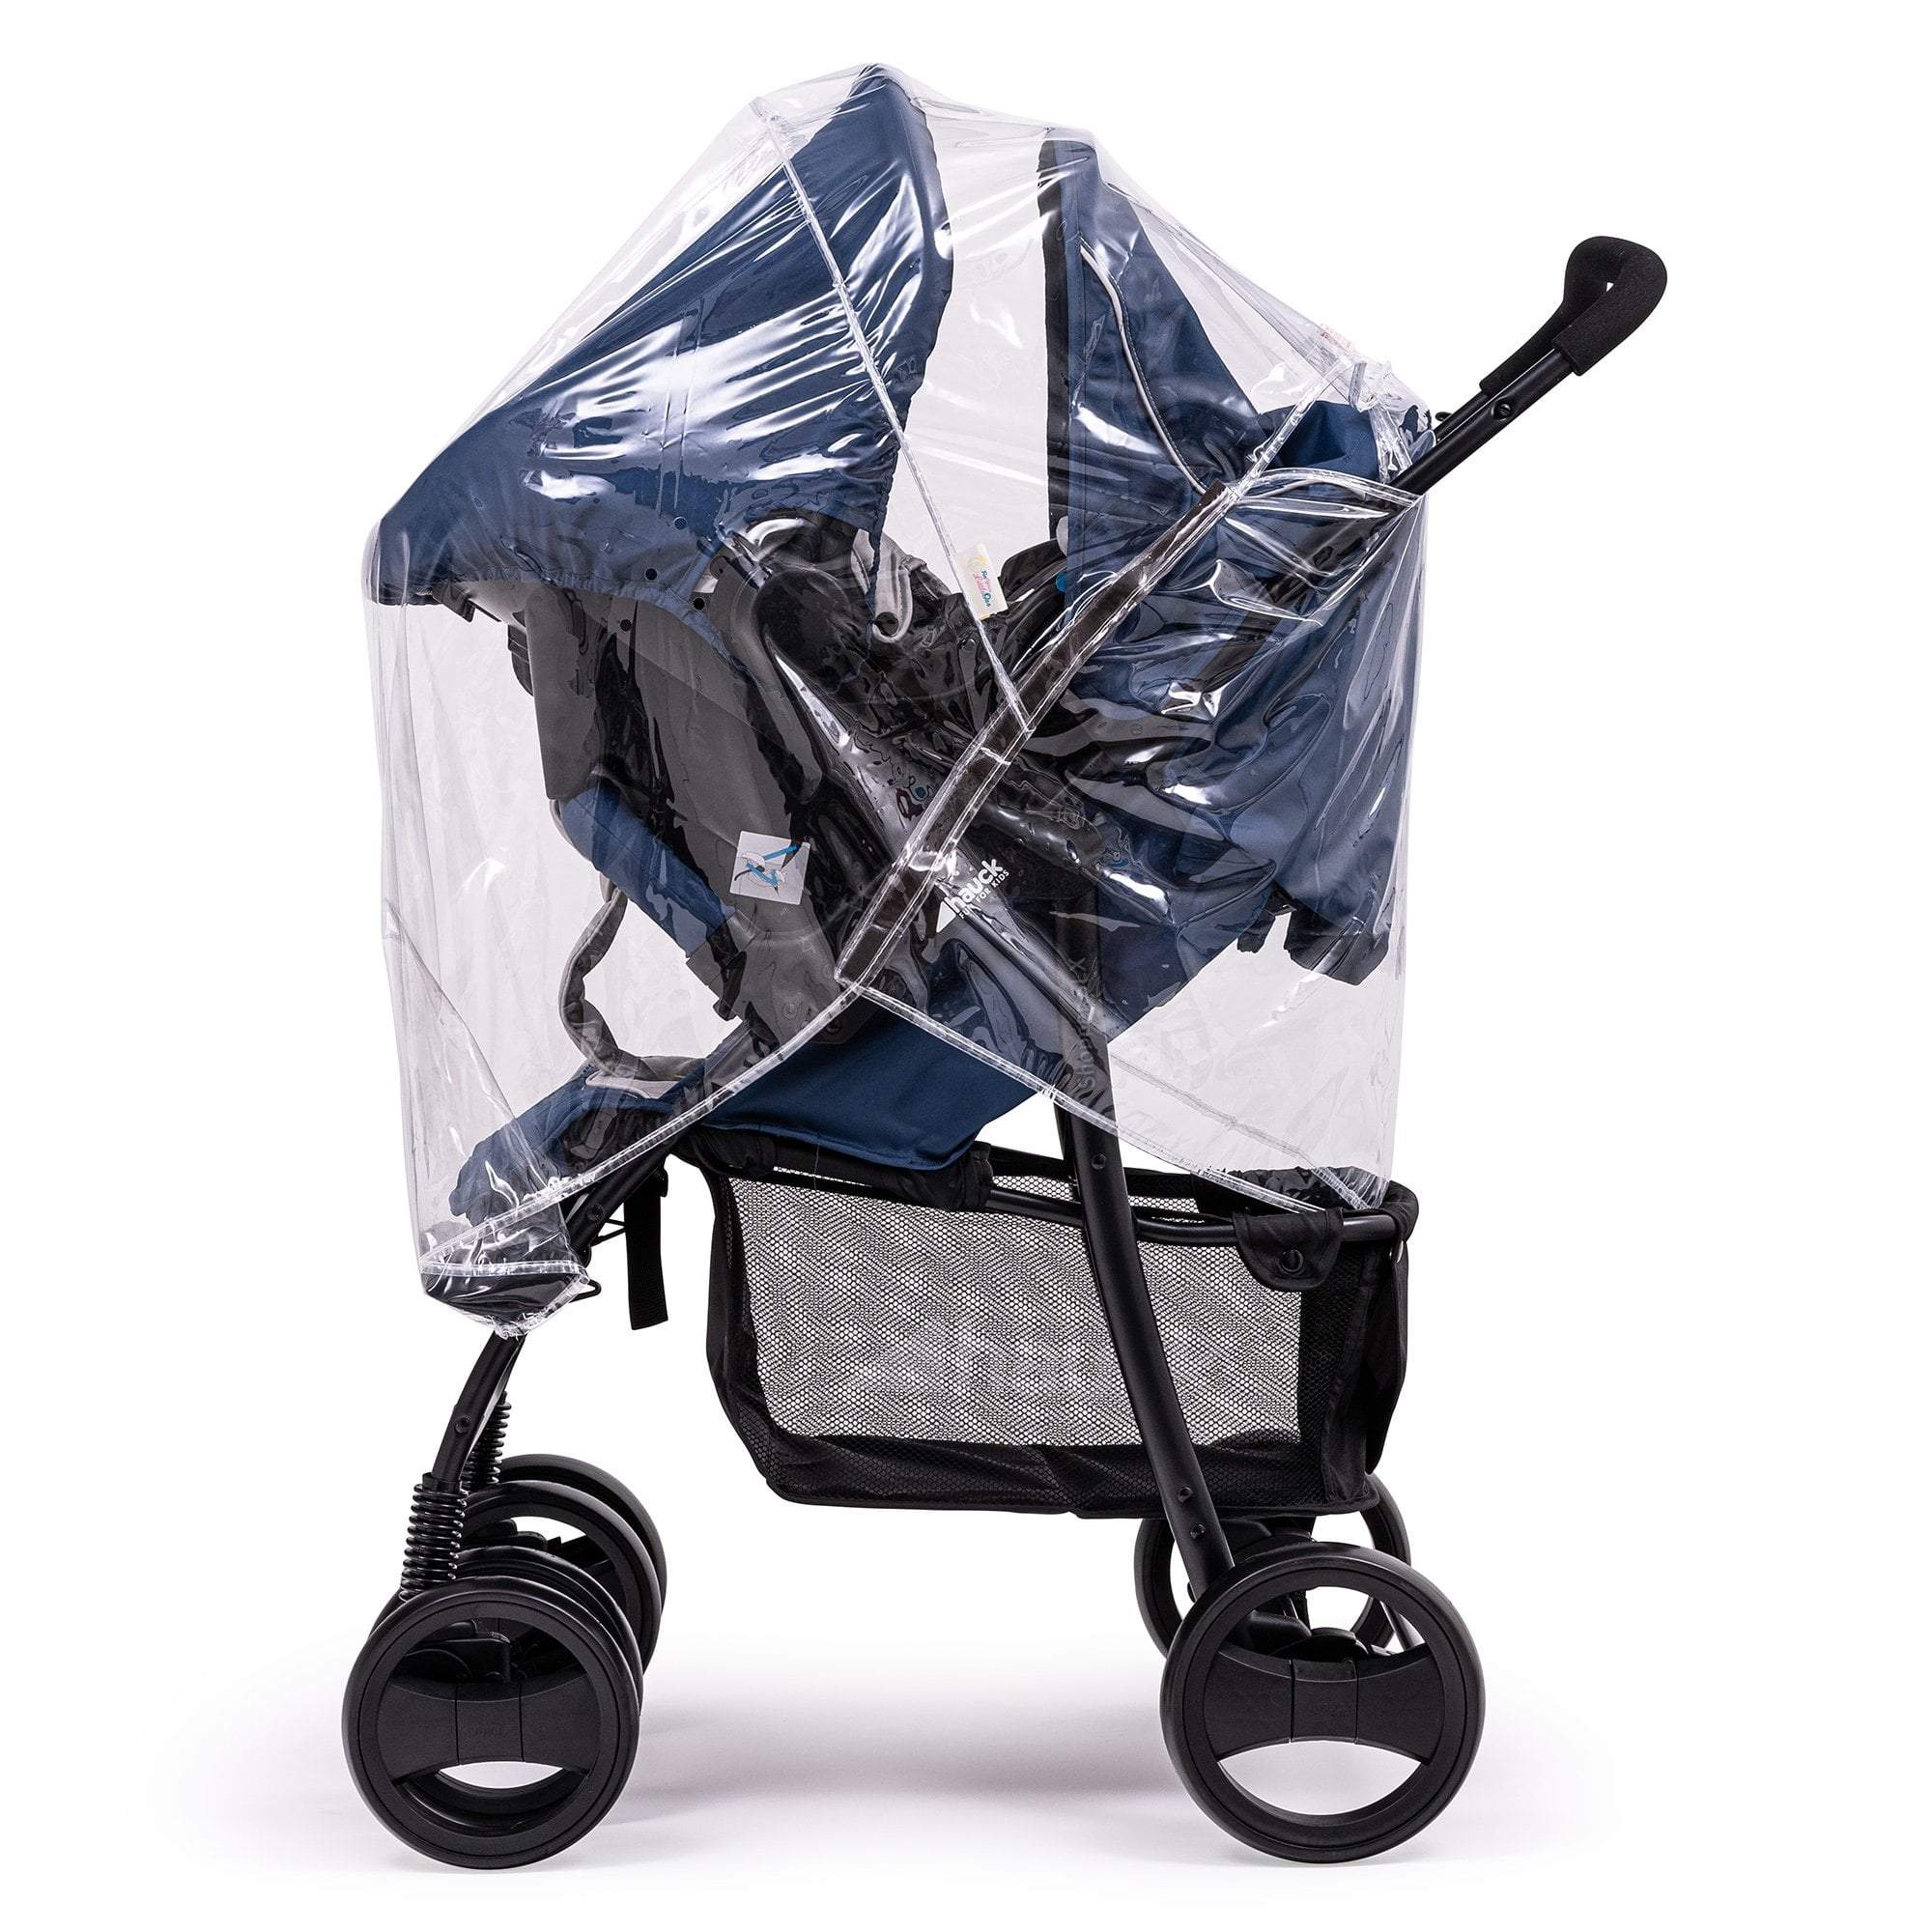 Travel System Raincover Compatible with Zooper - Fits All Models - For Your Little One